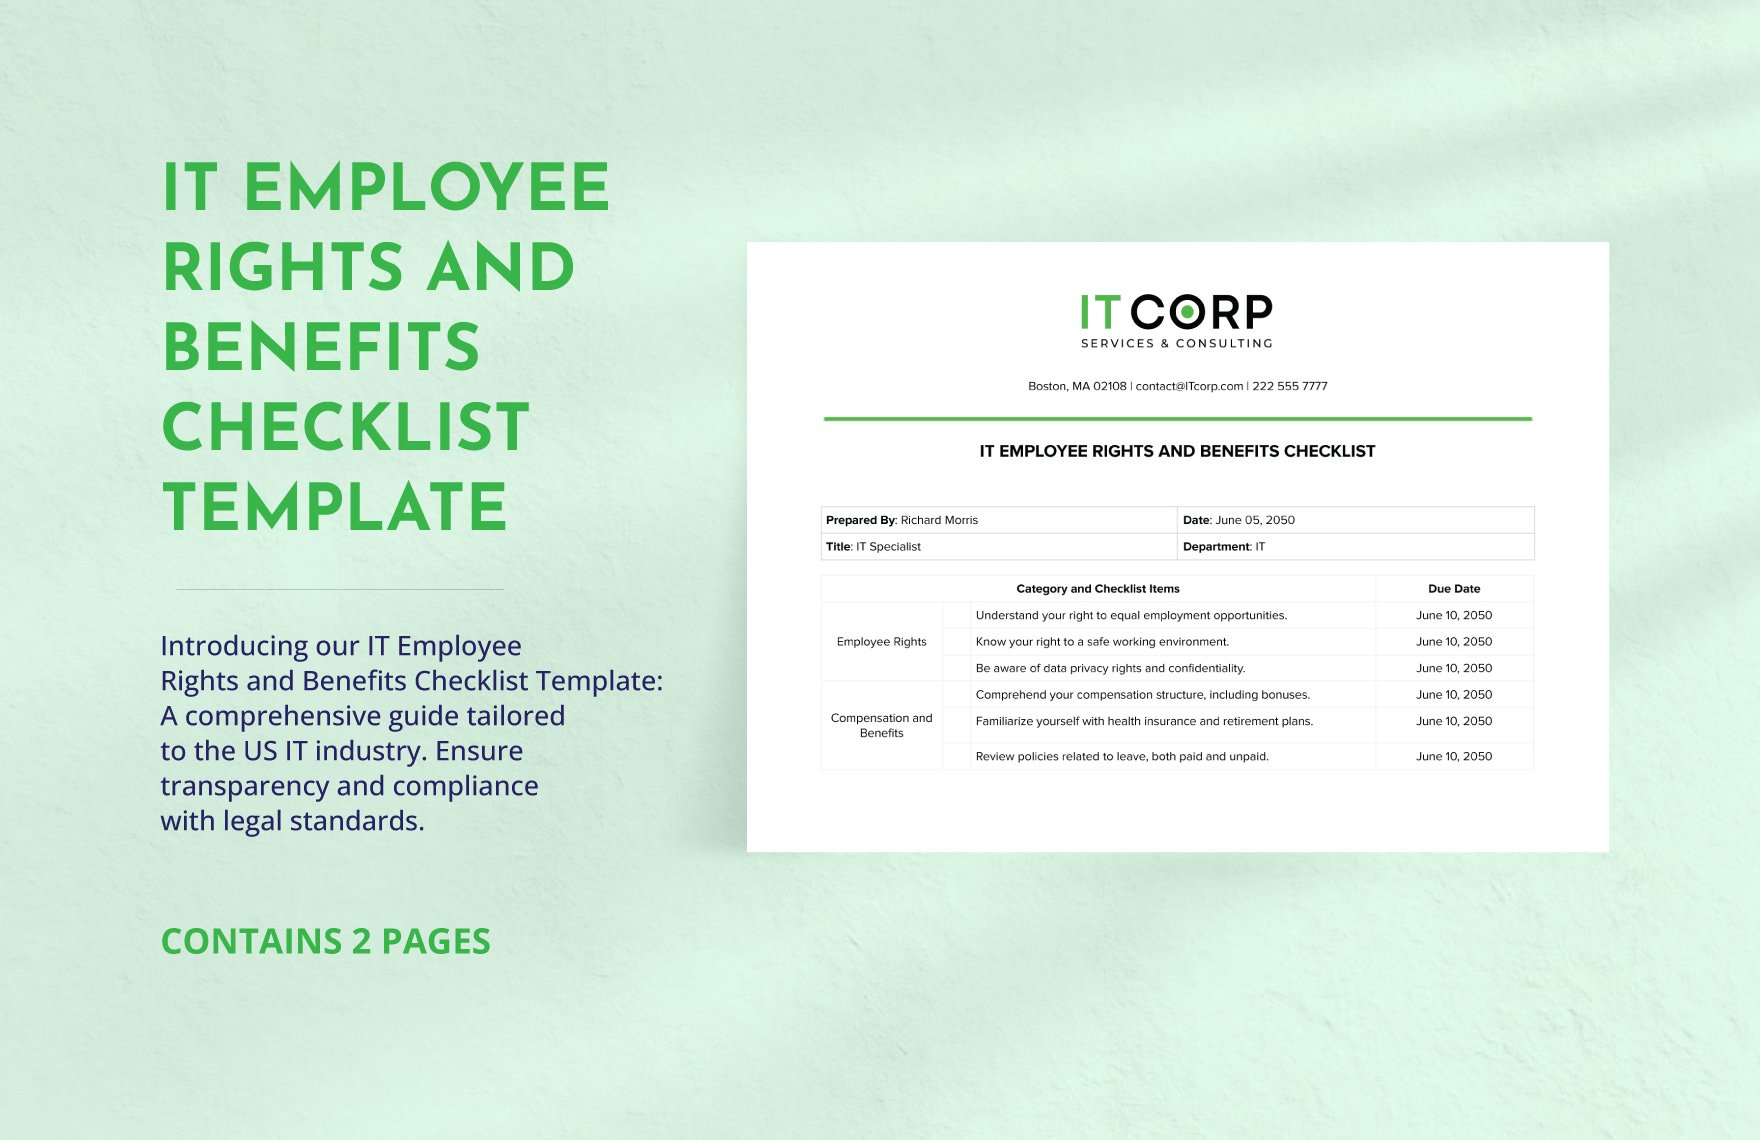 IT Employee Rights and Benefits Checklist Template